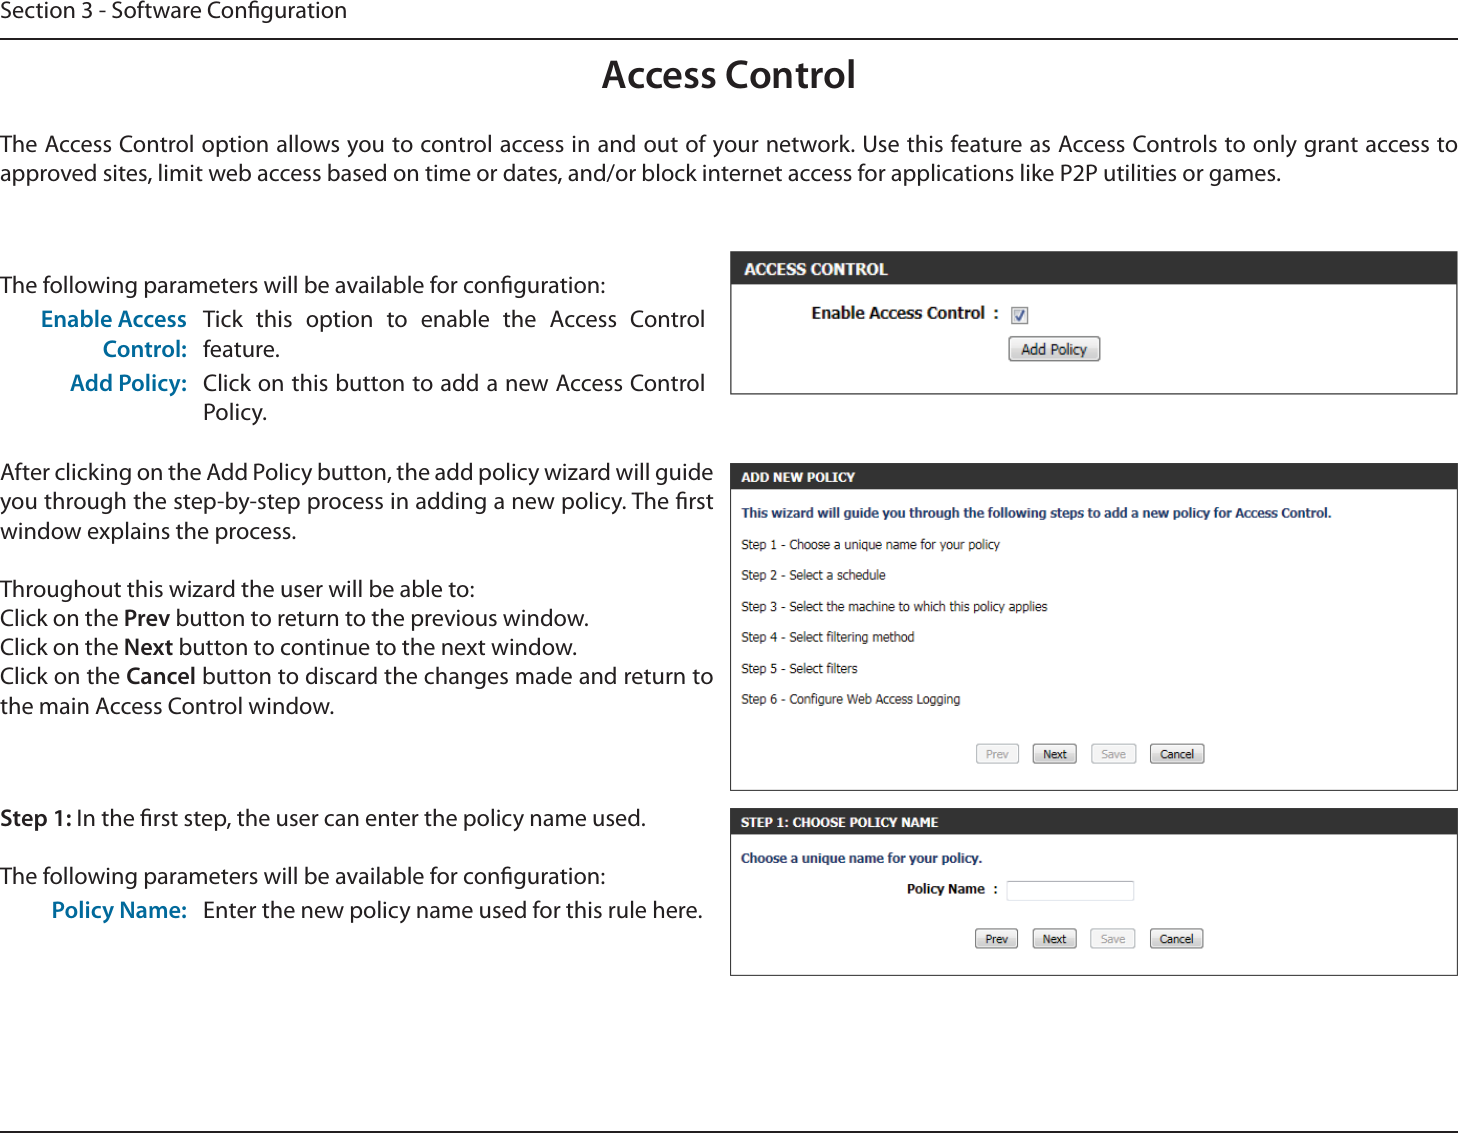 Section 3 - Software CongurationAccess ControlThe Access Control option allows you to control access in and out of your network. Use this feature as Access Controls to only grant access to approved sites, limit web access based on time or dates, and/or block internet access for applications like P2P utilities or games.The following parameters will be available for conguration:Enable Access Control:Tick this option to enable the Access Control feature.Add Policy: Click on this button to add a new Access Control Policy.After clicking on the Add Policy button, the add policy wizard will guide you through the step-by-step process in adding a new policy. The rst window explains the process.Throughout this wizard the user will be able to:Click on the Prev button to return to the previous window.Click on the Next button to continue to the next window.Click on the Cancel button to discard the changes made and return to the main Access Control window.Step 1: In the rst step, the user can enter the policy name used.The following parameters will be available for conguration:Policy Name: Enter the new policy name used for this rule here.